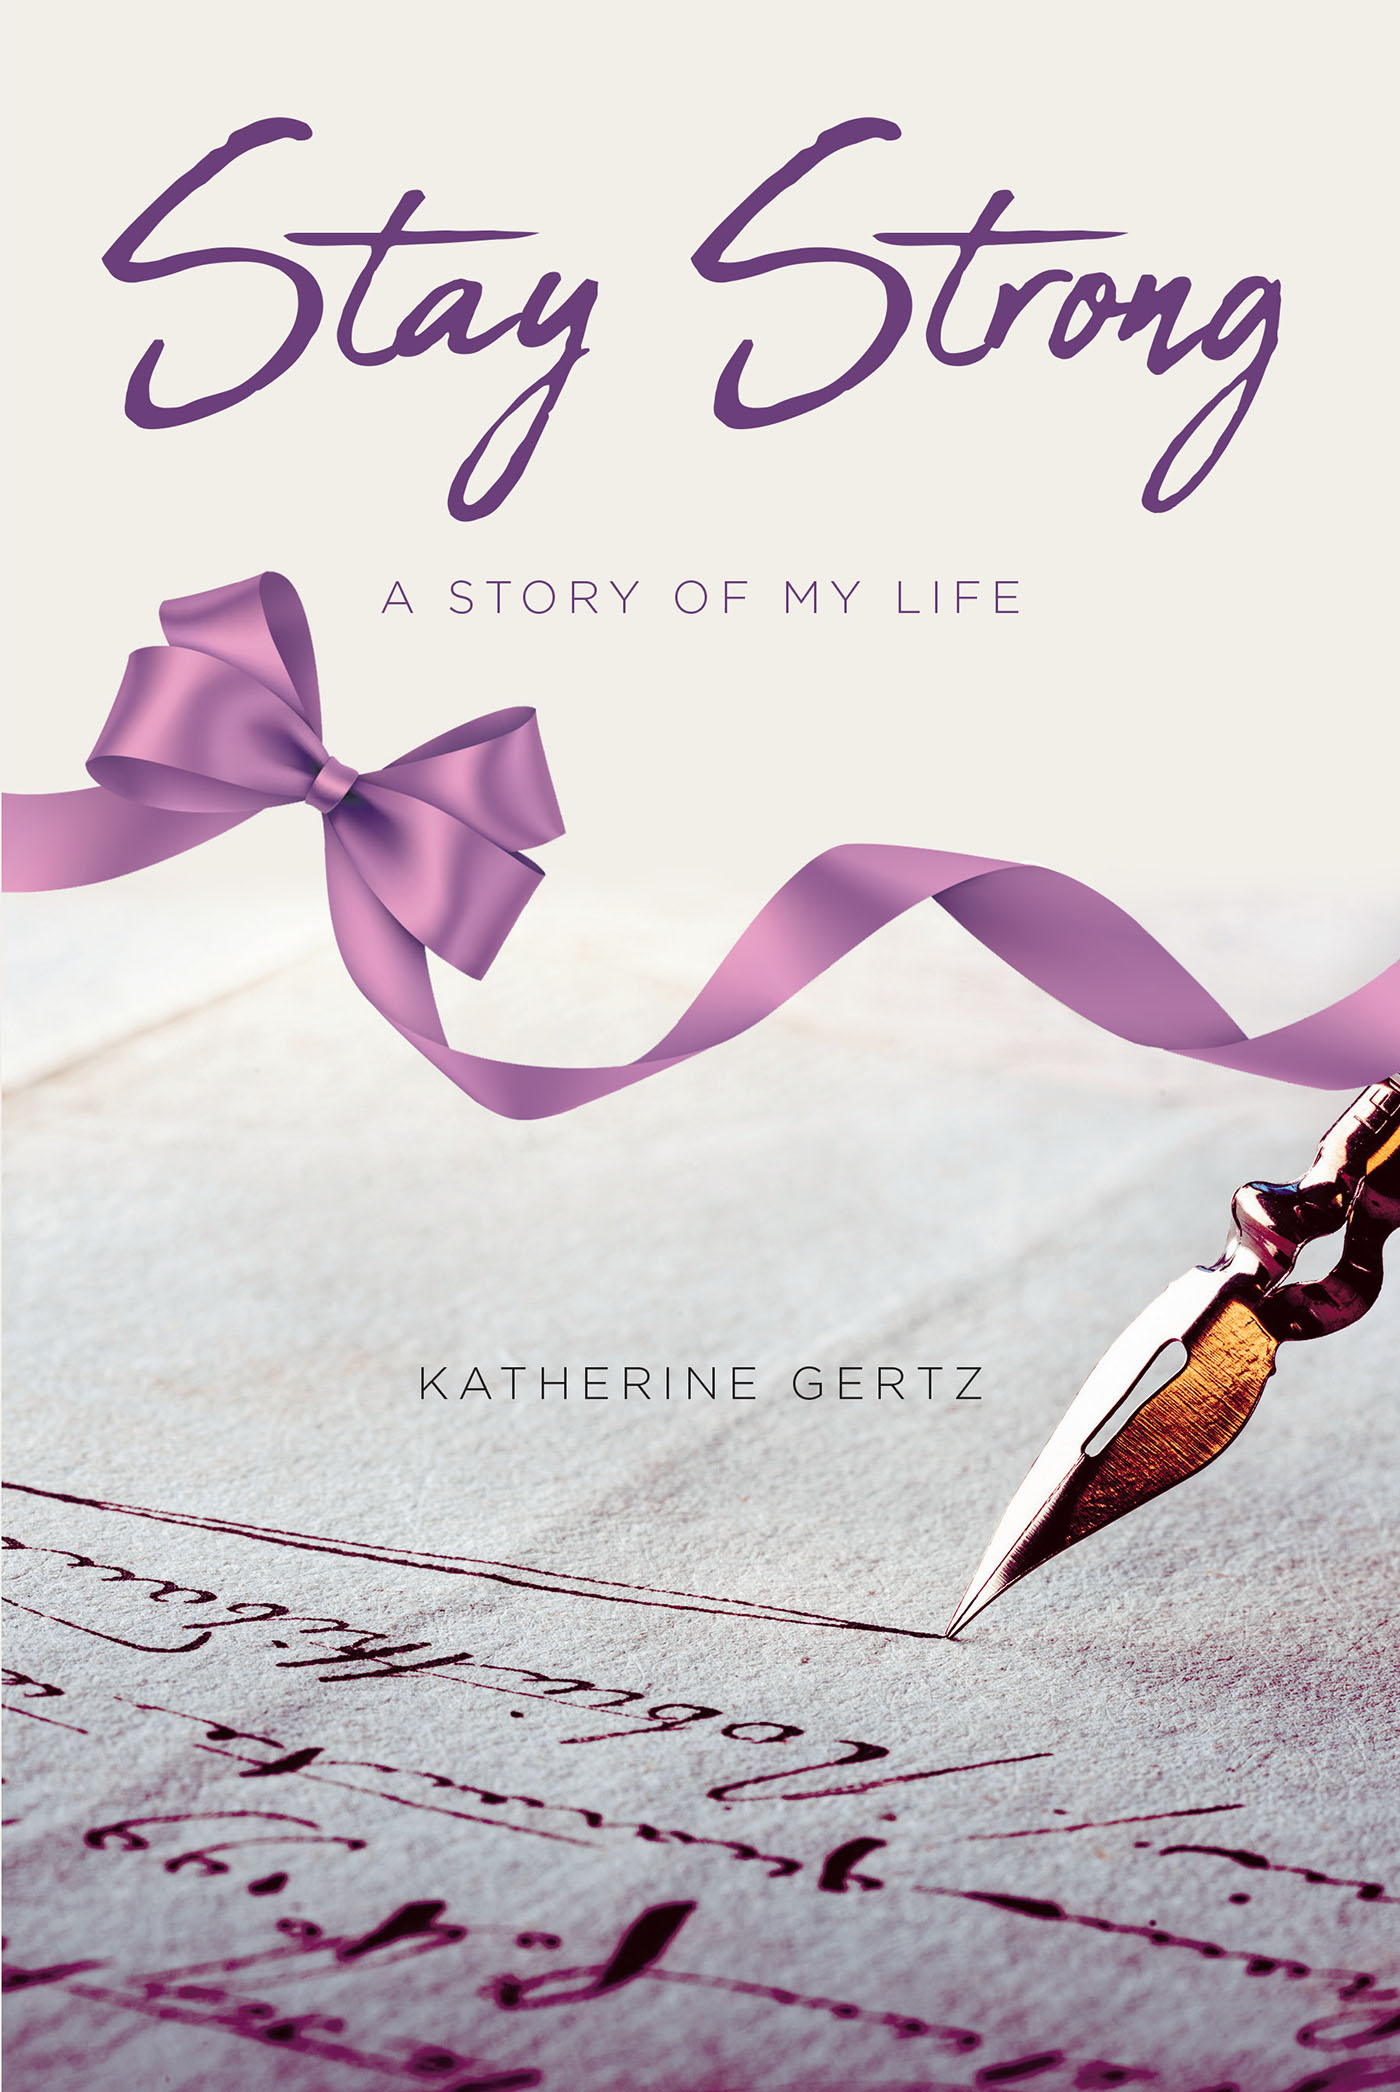 Katherine Gertz’s New Book, "Stay Strong: A Story of My Life," Shares the Empowering Story of a Woman Who Has Been a Victim, Survivor, & Warrior